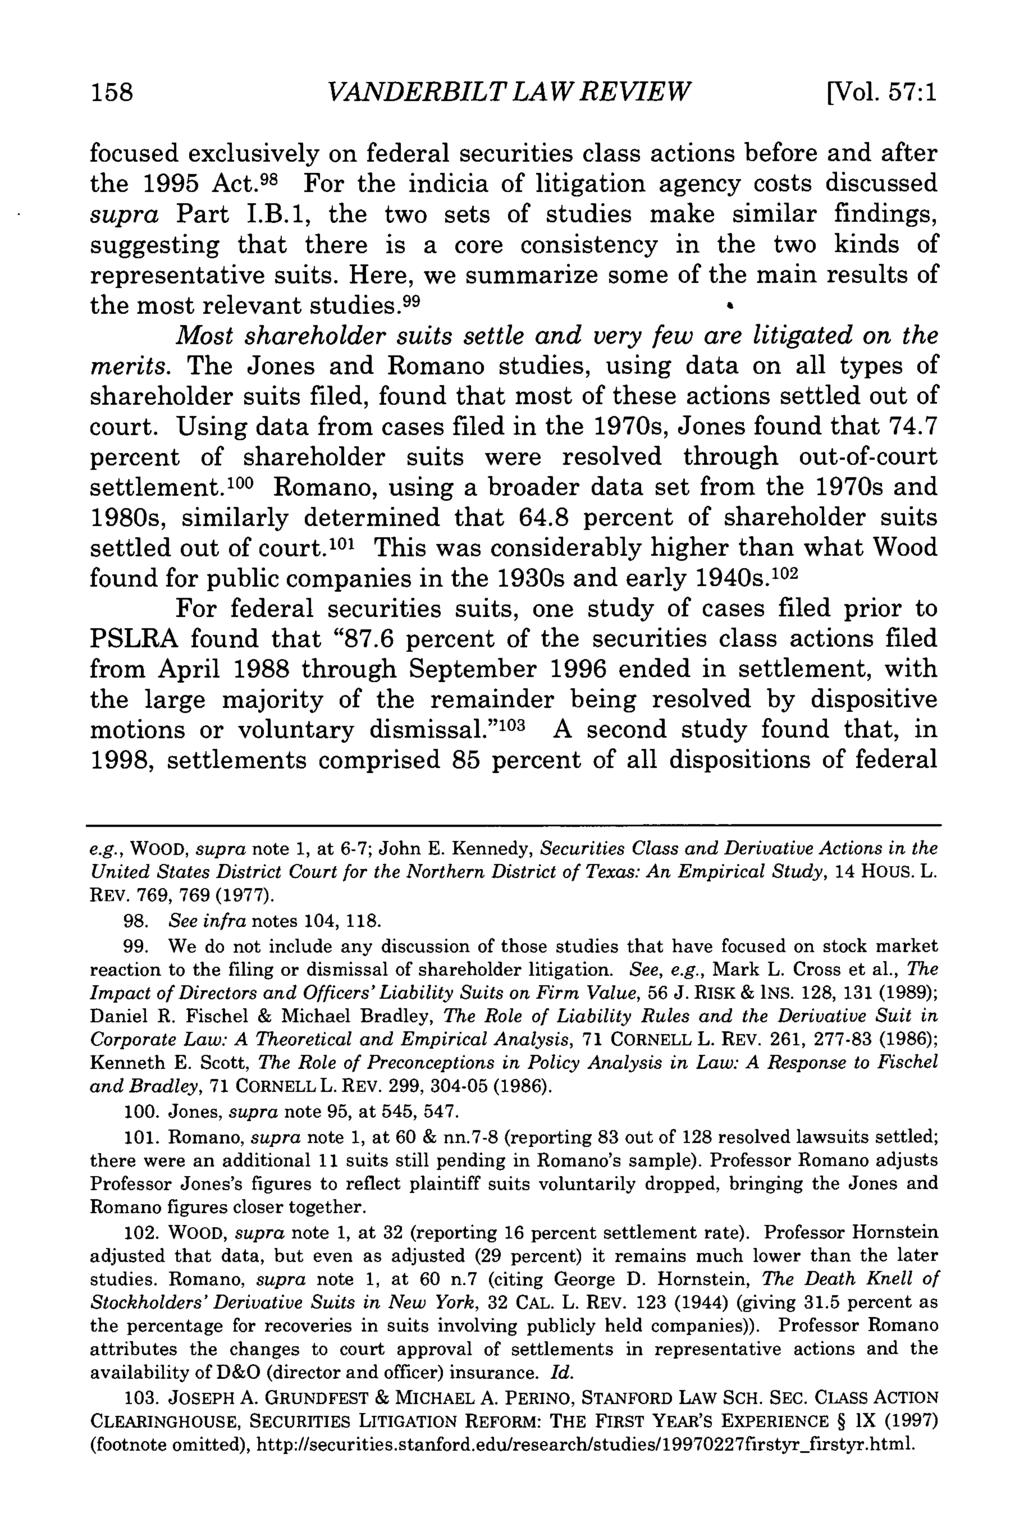 158 VANDERBILT LAW REVIEW [Vol. 57:1 focused exclusively on federal securities class actions before and after the 1995 Act. 98 For the indicia of litigation agency costs discussed supra Part I.B.1, the two sets of studies make similar findings, suggesting that there is a core consistency in the two kinds of representative suits.